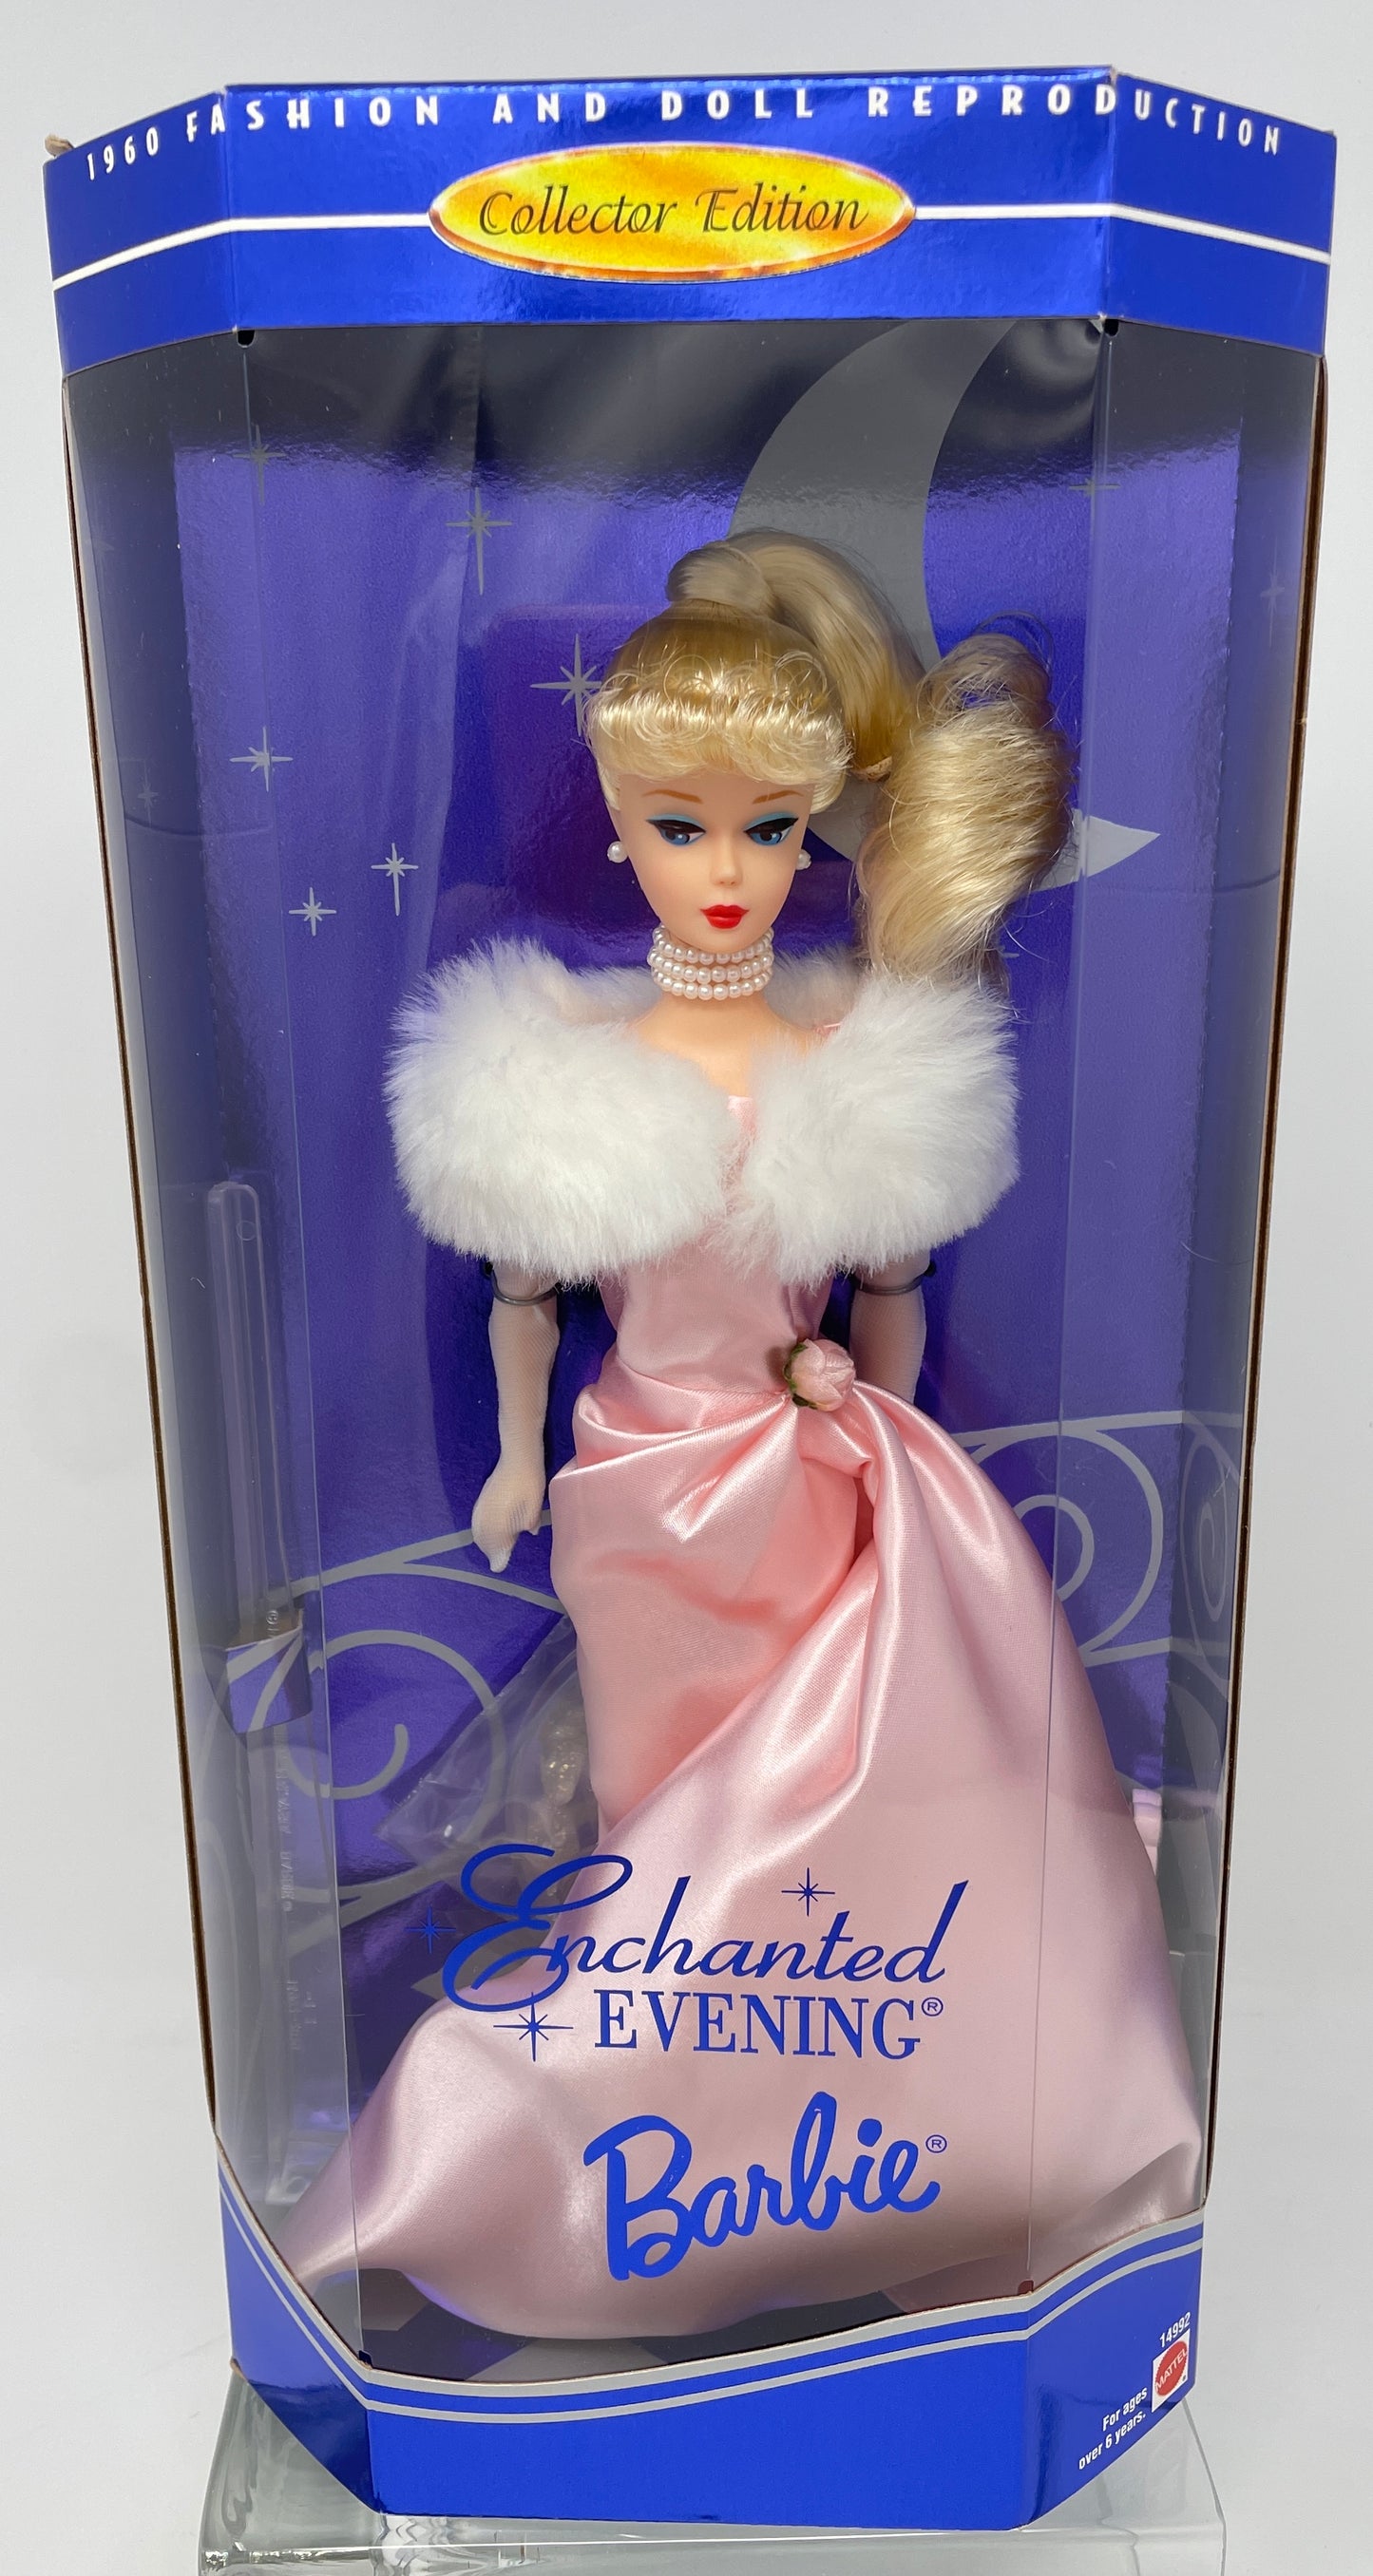 ENCHANTED EVENING BARBIE - COLLECTOR EDITION - #14992 - MATTEL 1995 (2 of 2)